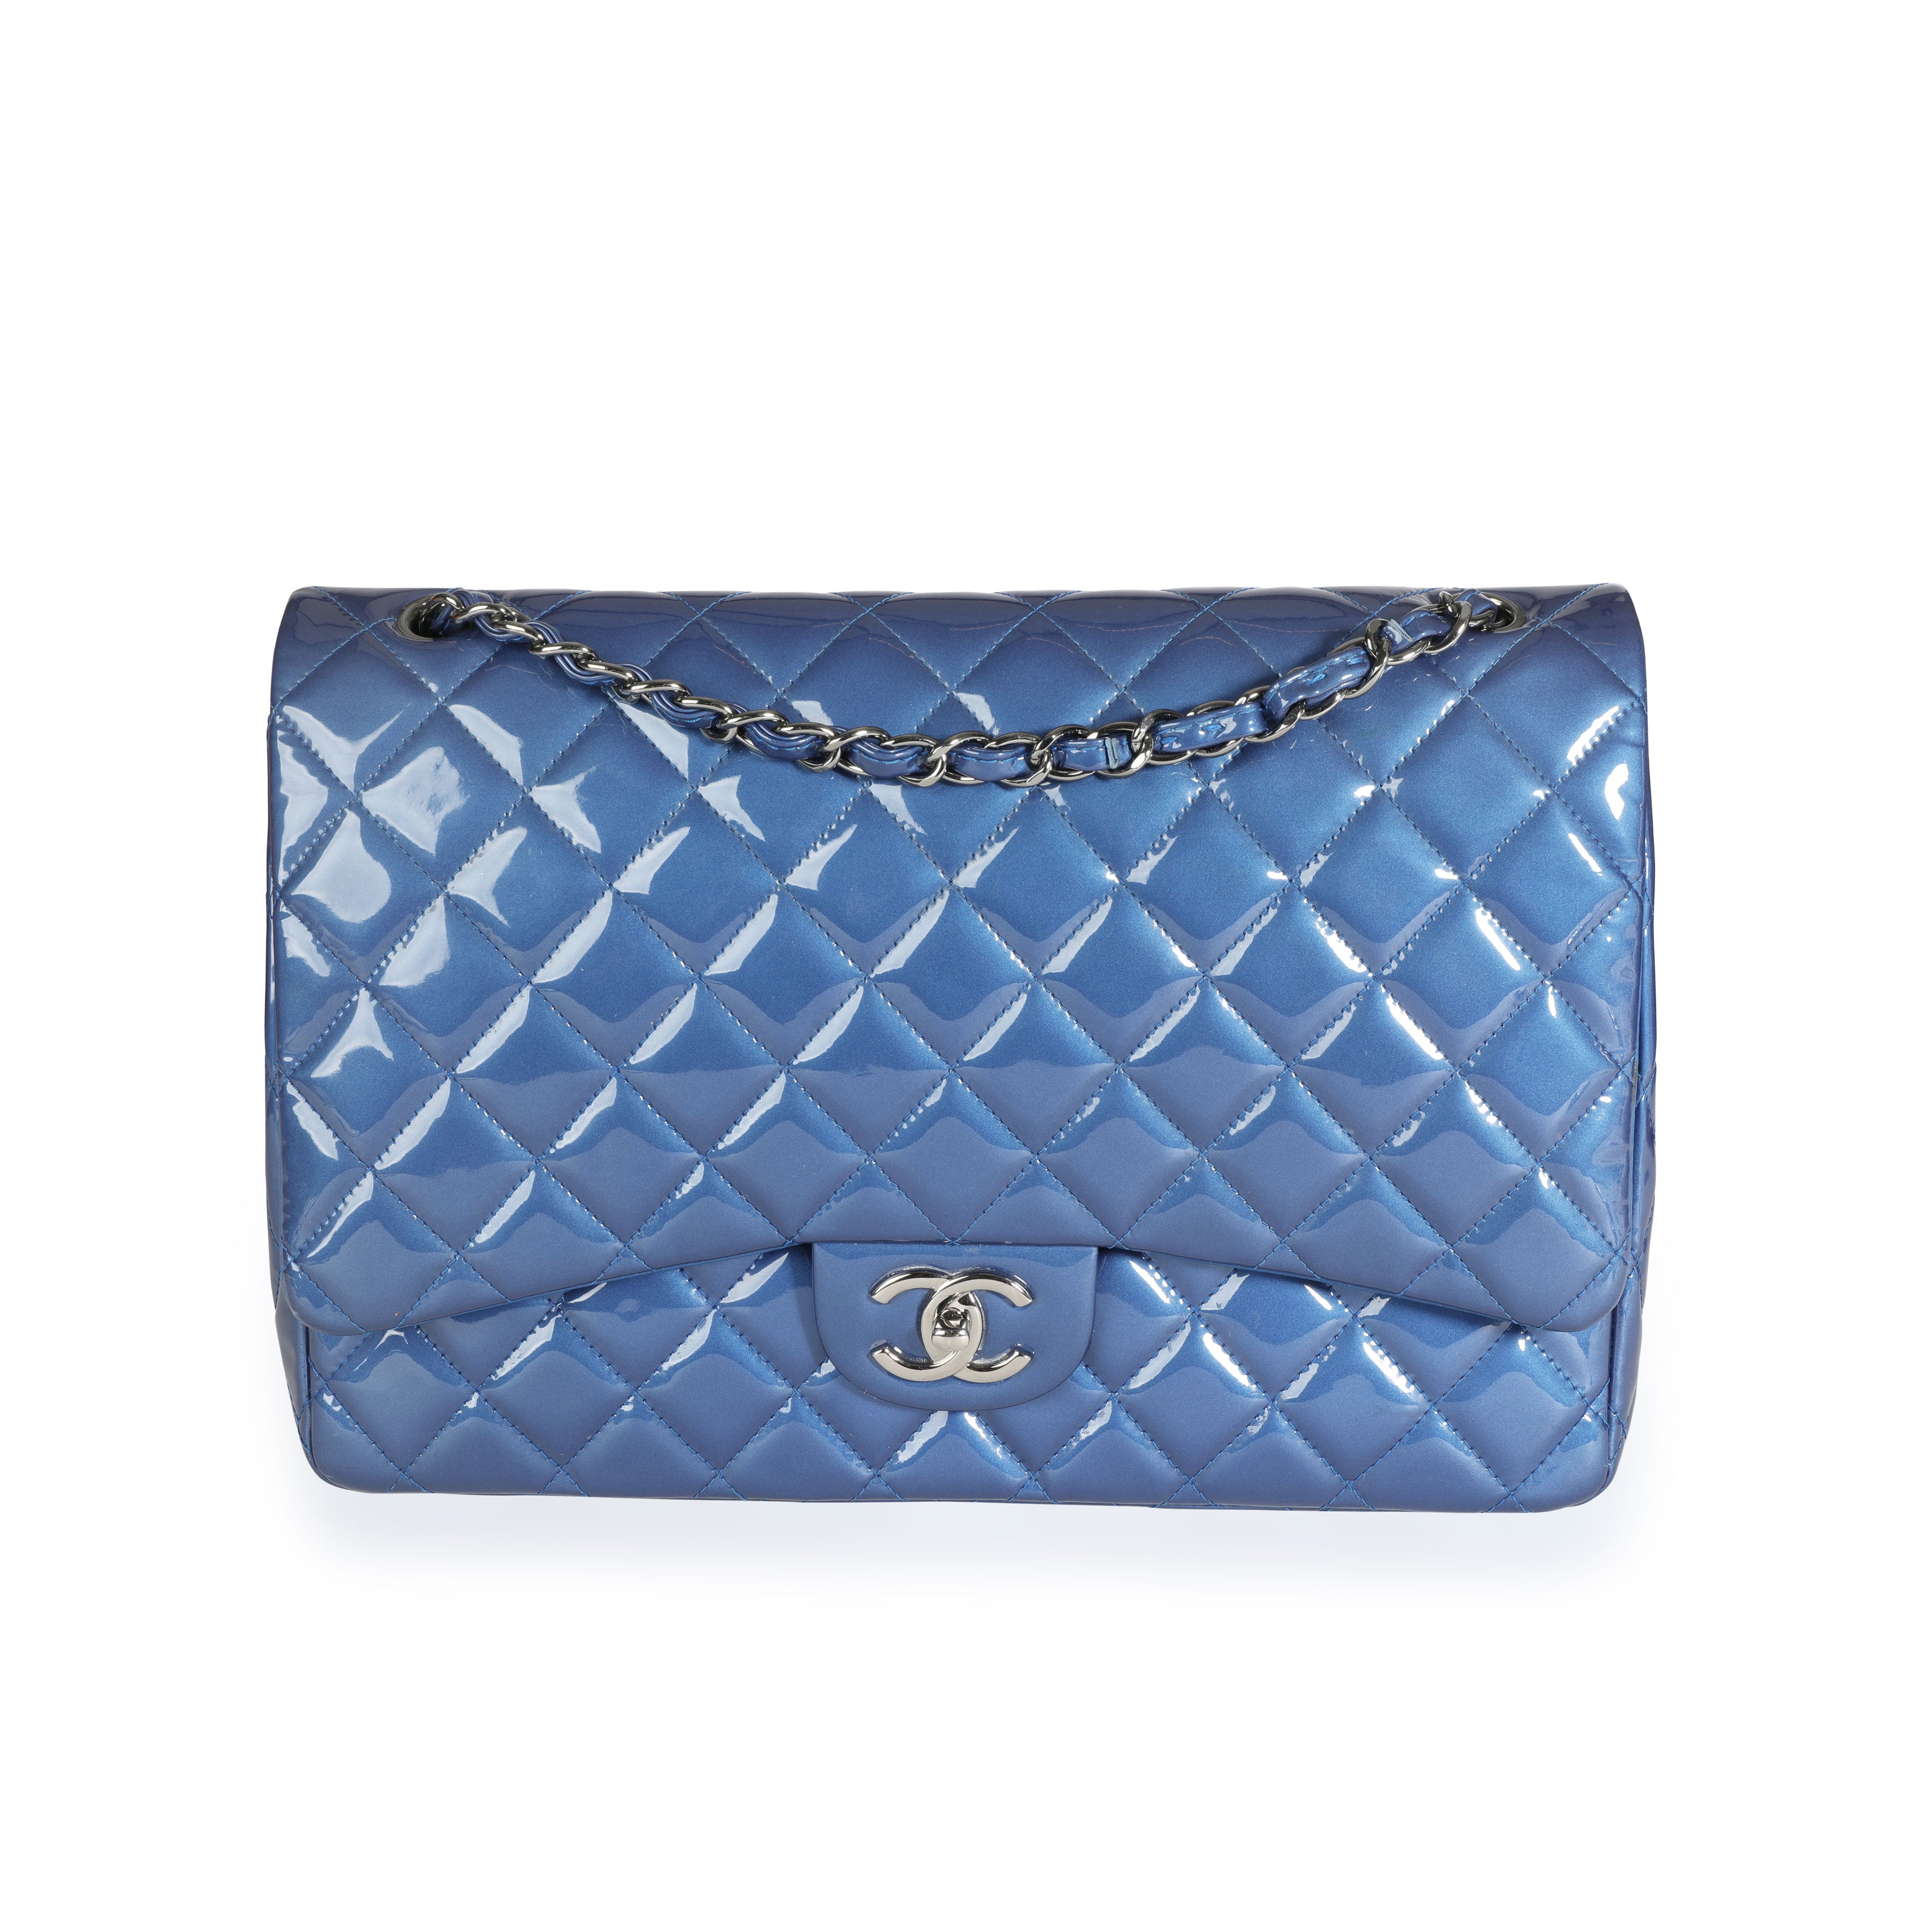 Chanel Blue Patent Leather Quilted Maxi Classic Double Flap Bag